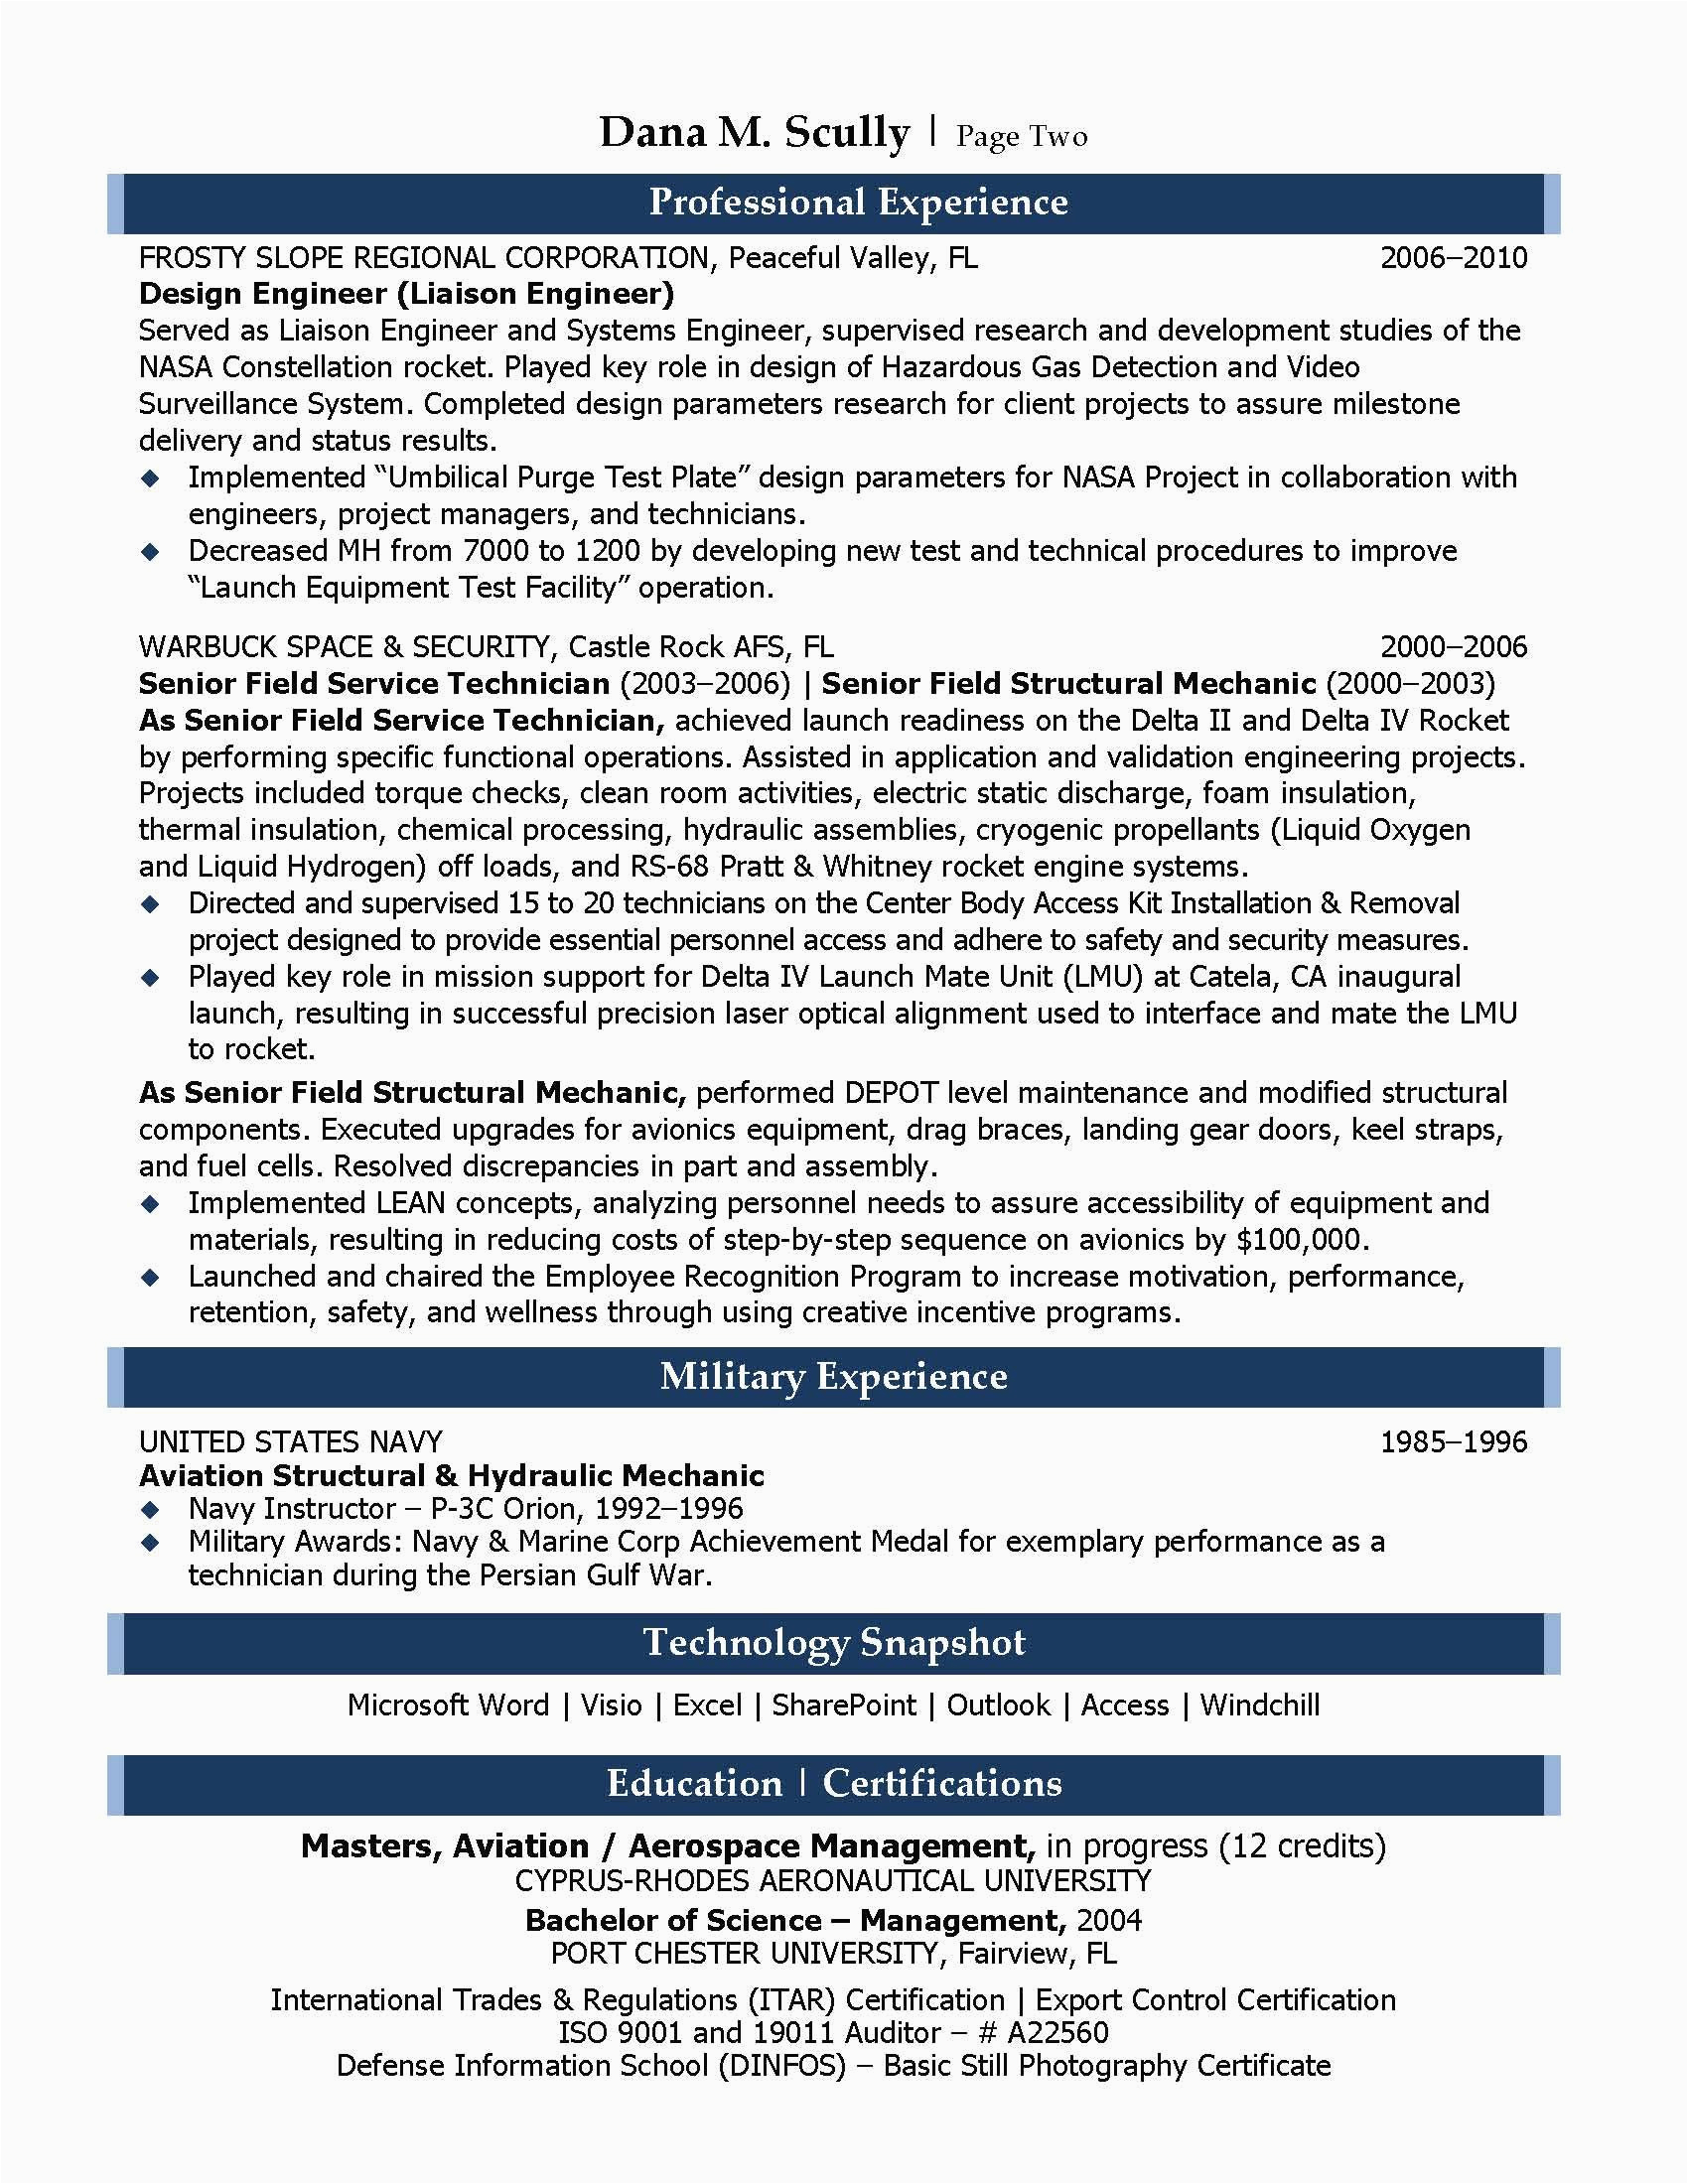 Oil and Gas Electrical Engineer Resume Sample Oil and Gas Electrical Engineer Resume Sample